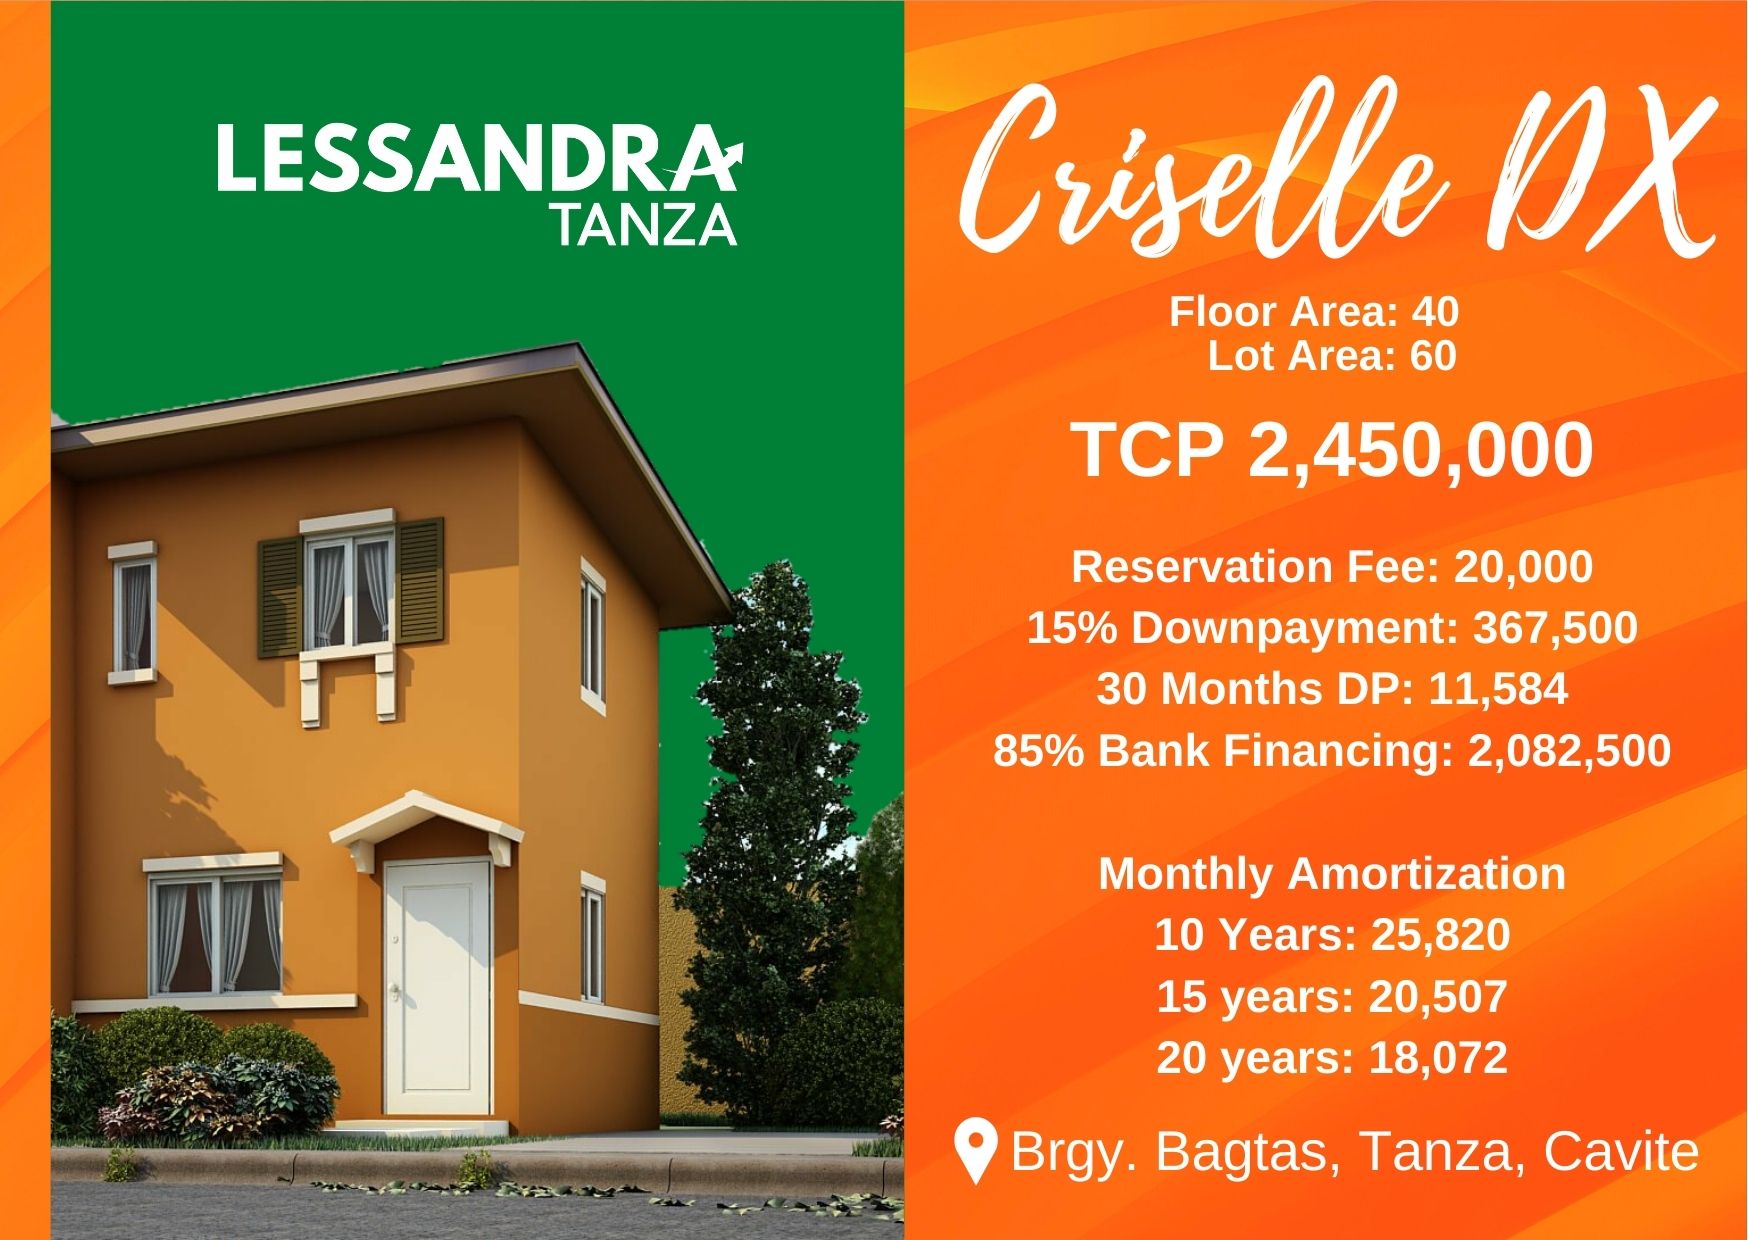 House and Lot in Tanza, Cavite Criselle DX